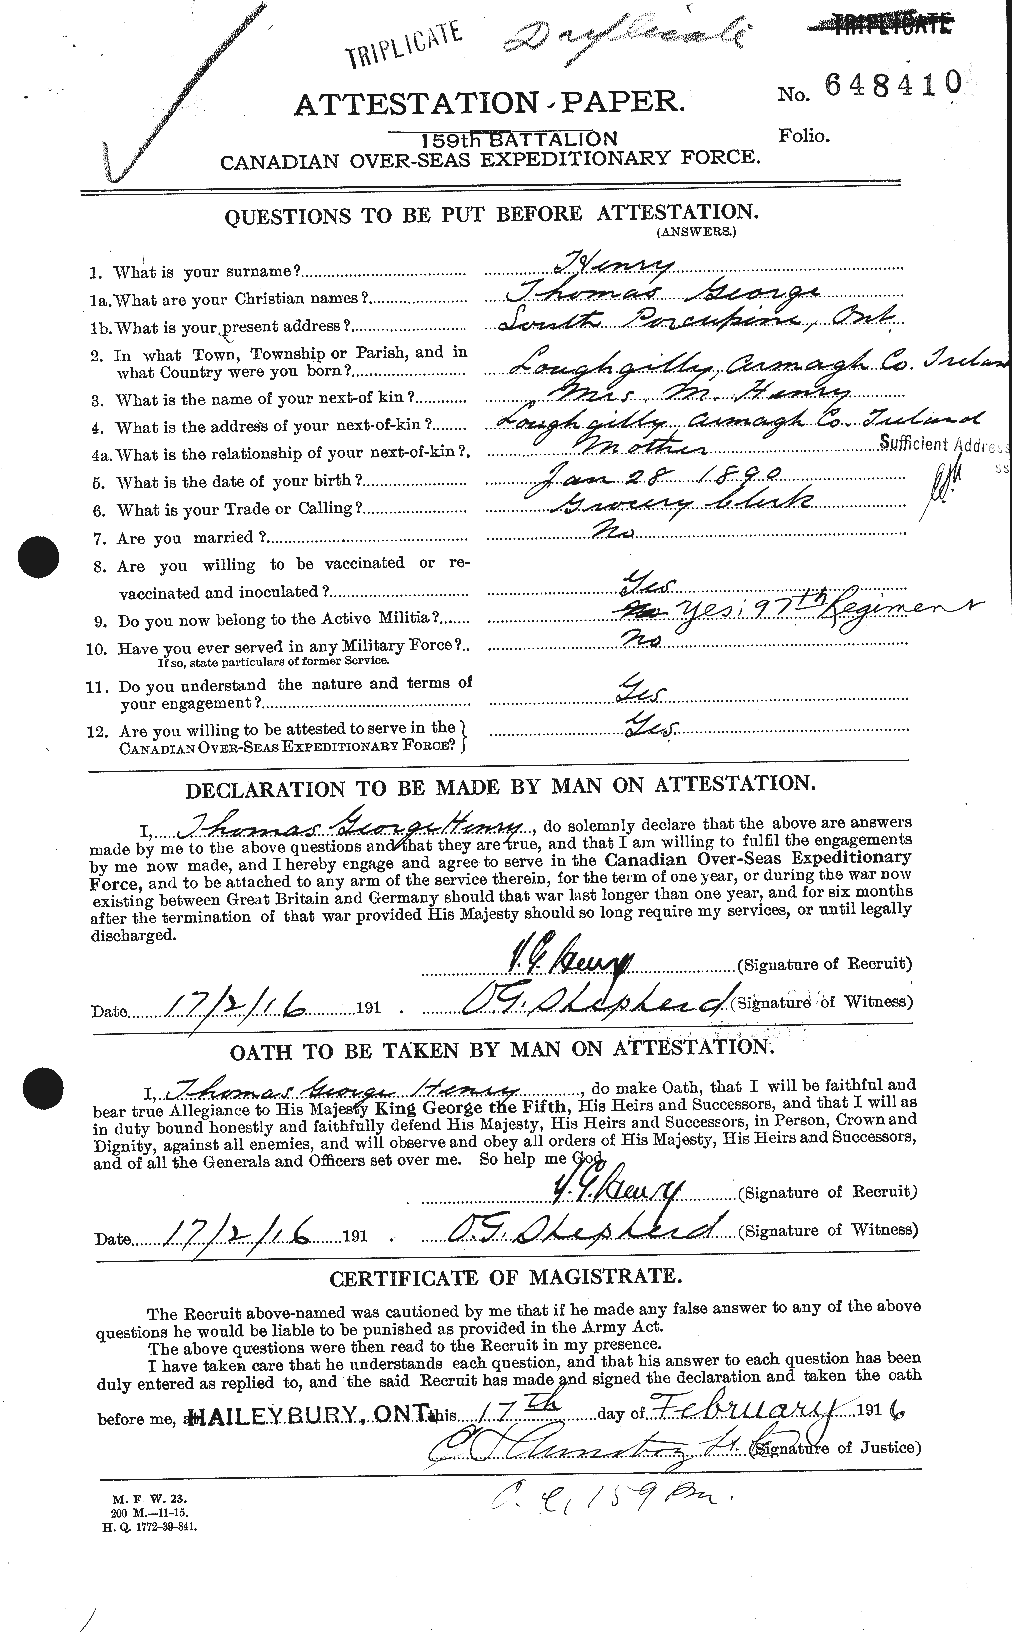 Personnel Records of the First World War - CEF 387737a